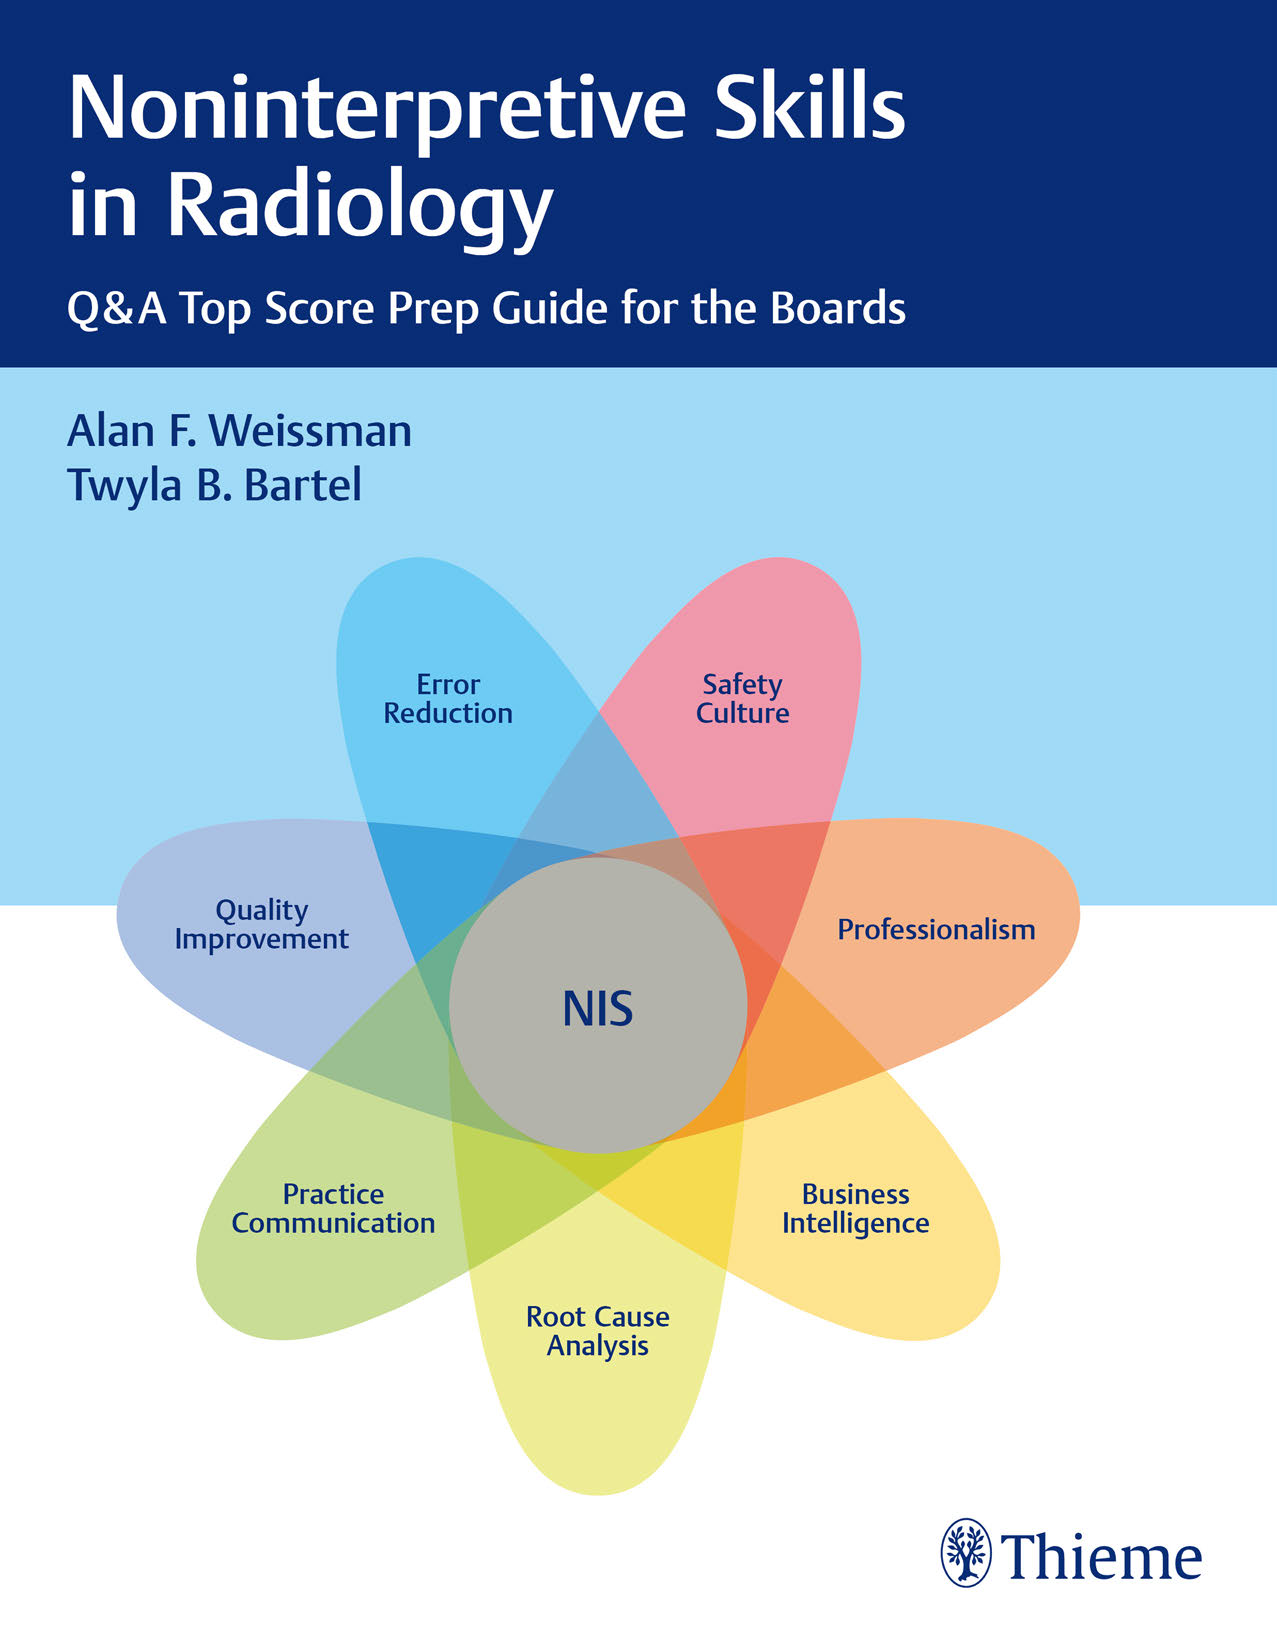 Weissman - Noninterpretive Skills in Radiology - Q&A Top Score Prep Guide for the Boards